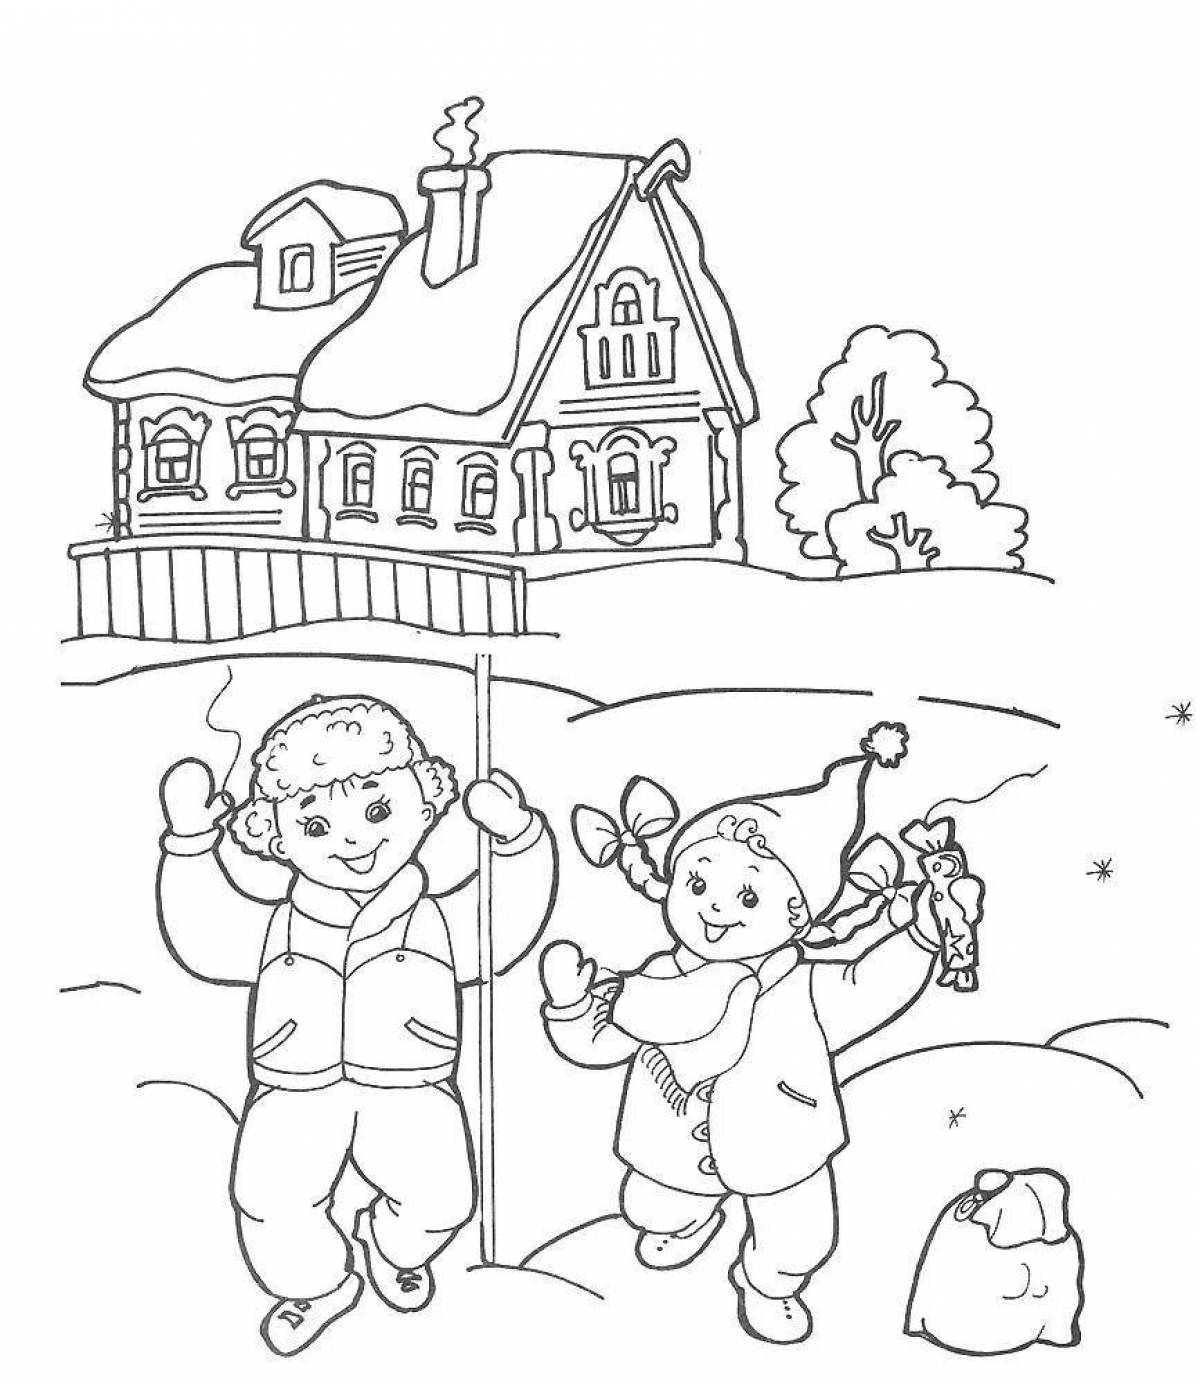 Carol's fun coloring book for 6-7 year olds